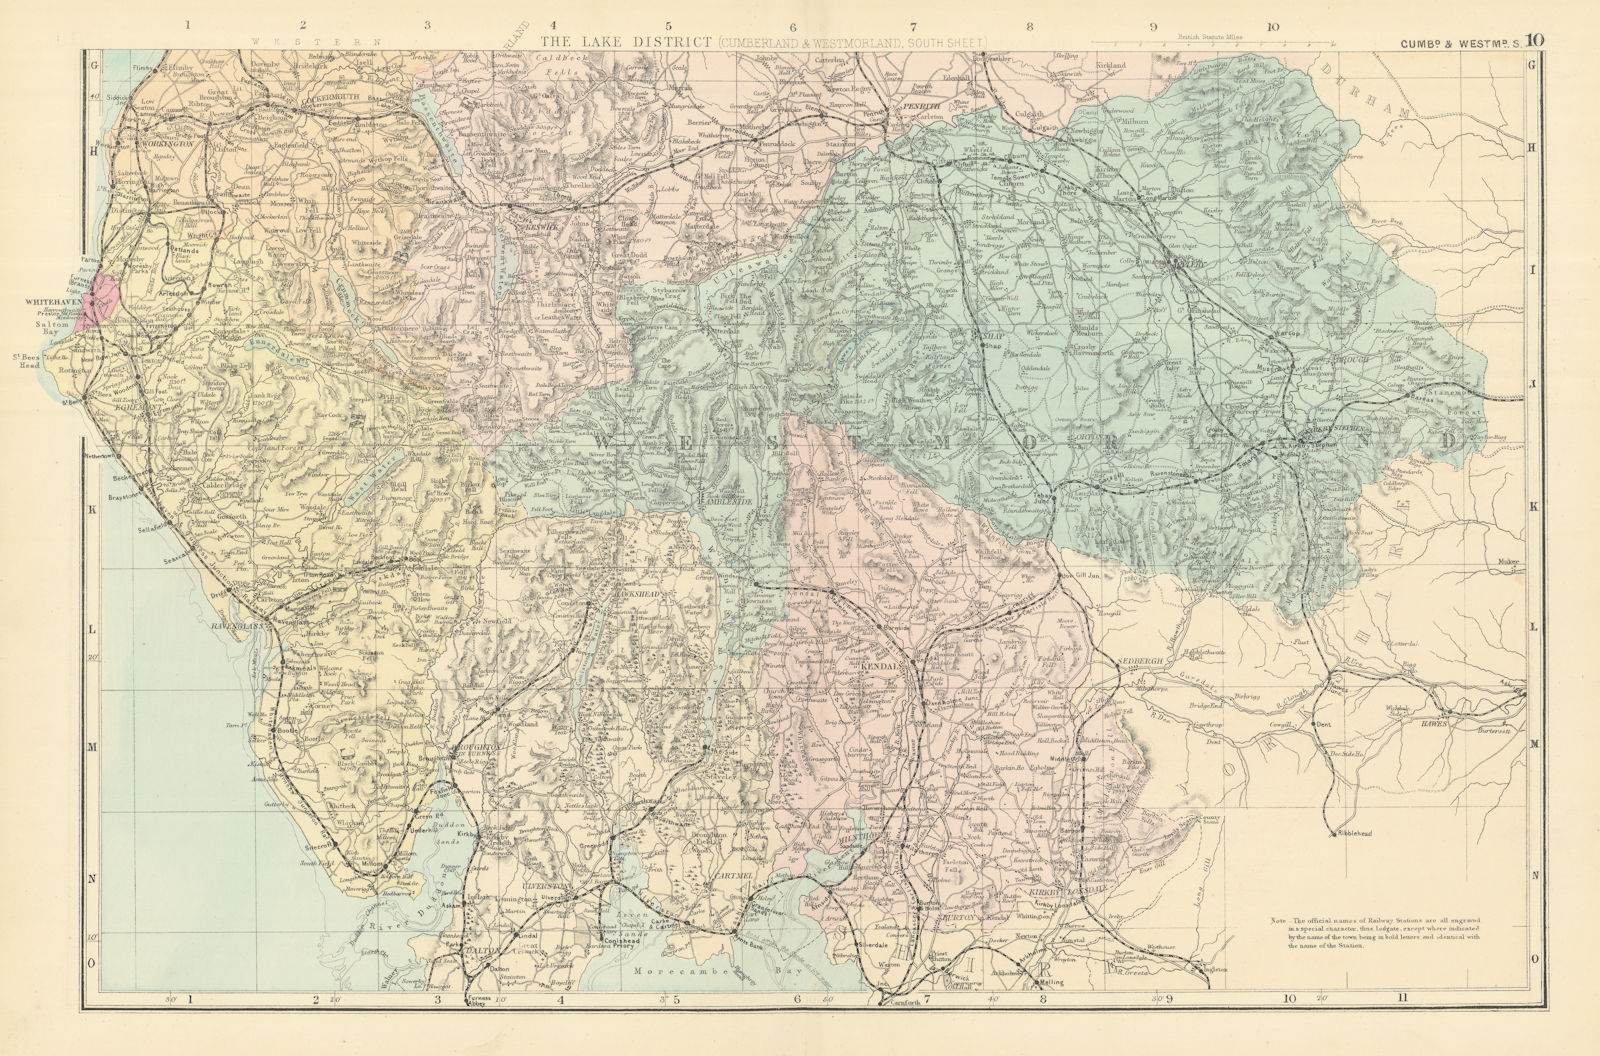 Associate Product LAKE DISTRICT Cumbria & Westmorland (South sheet) County map GW BACON 1891